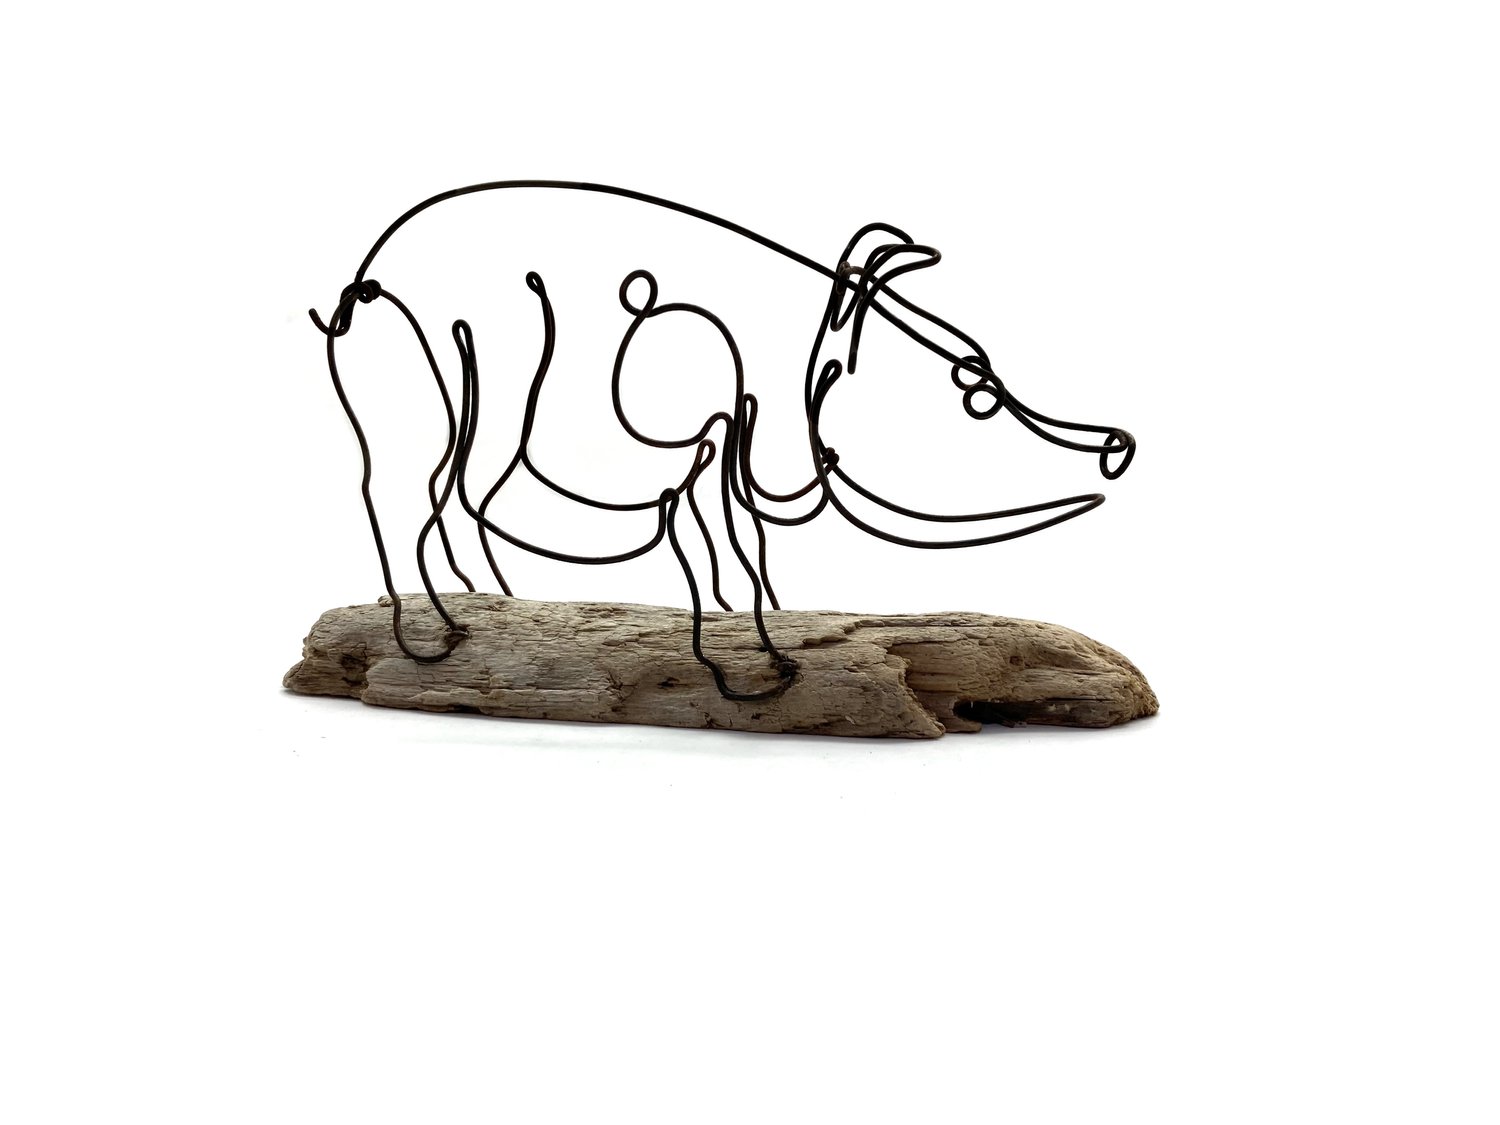 Pig Wire Sculpture, Pig Wire Art, Farm Animal Art, One Continuous Line  Sculpture — Wired by Bud